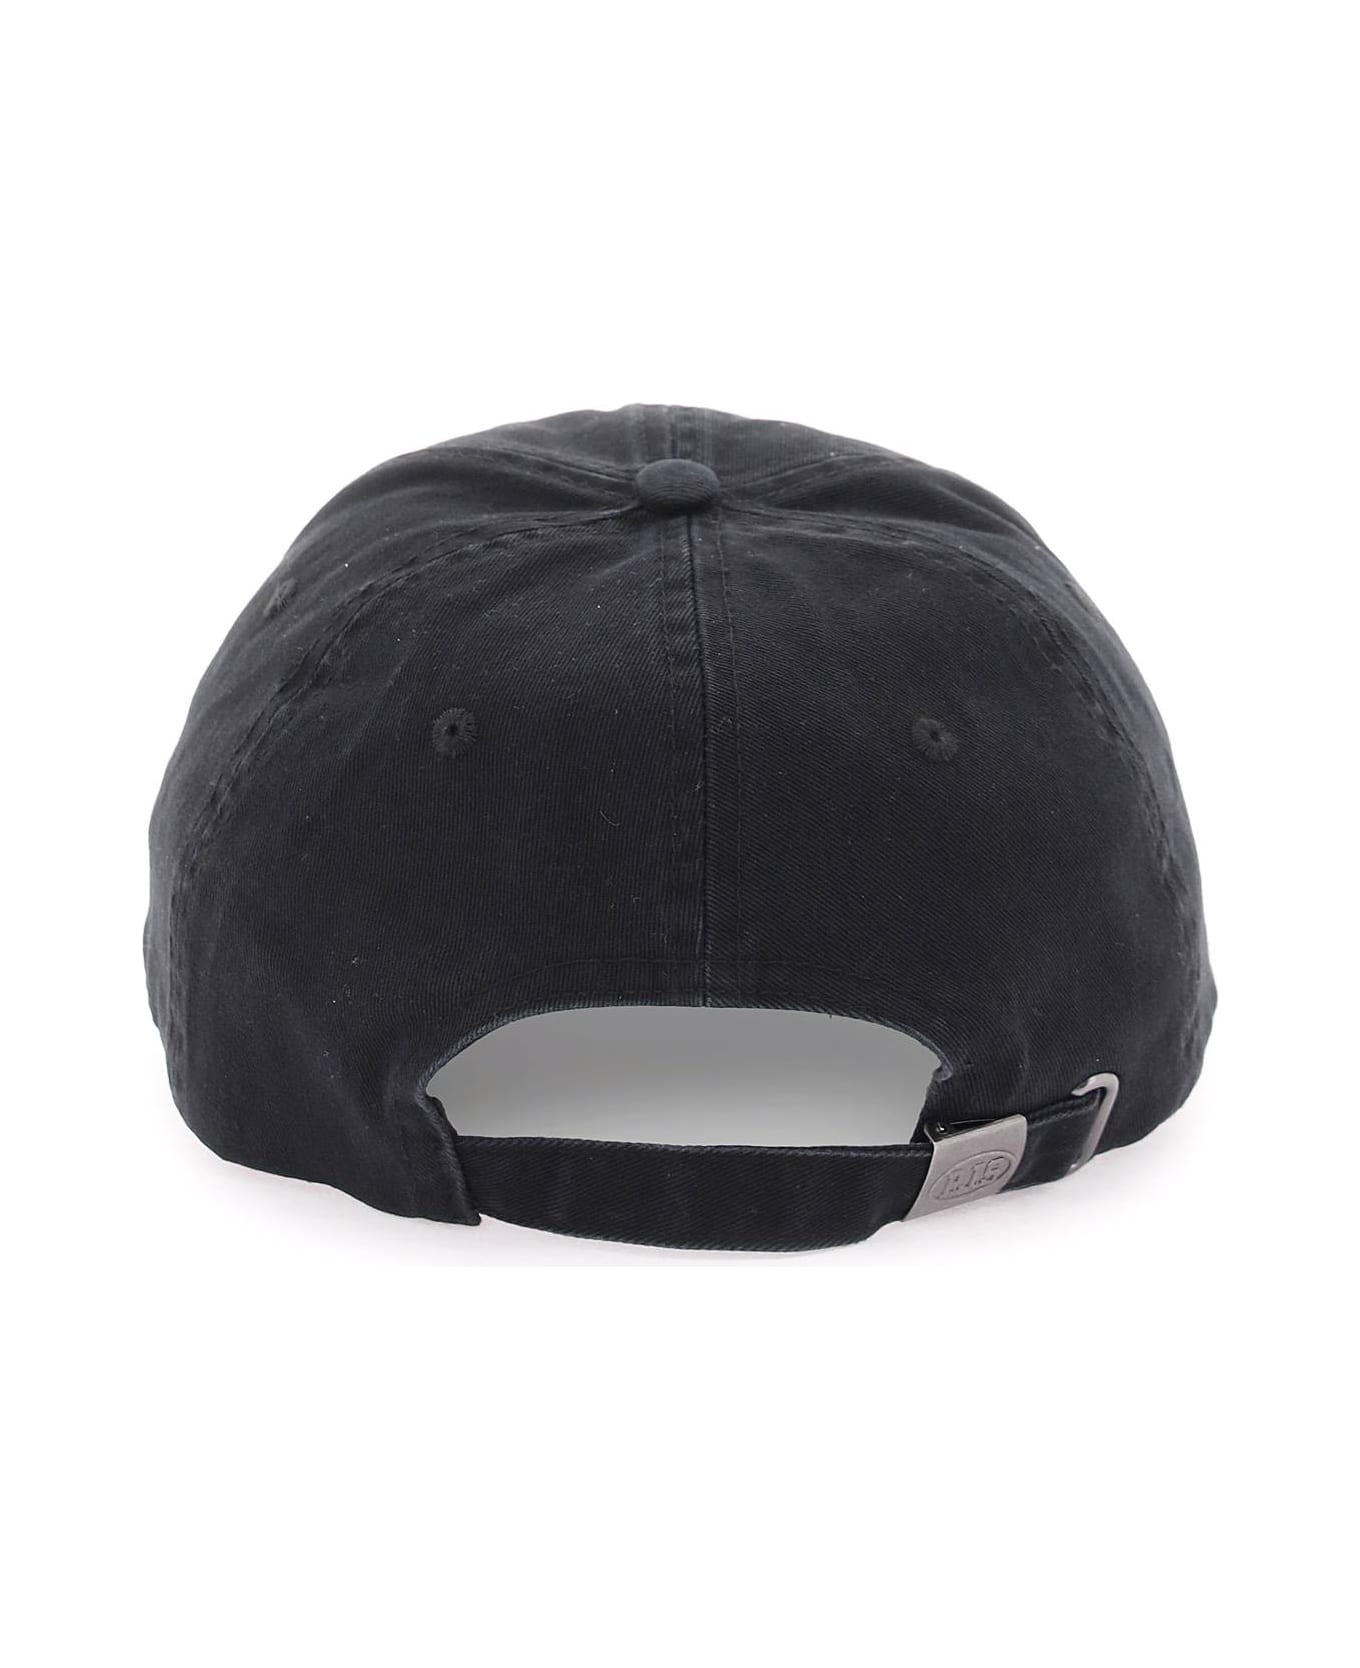 Parajumpers Baseball Cap With Embroidery - BLACK (Black) コート